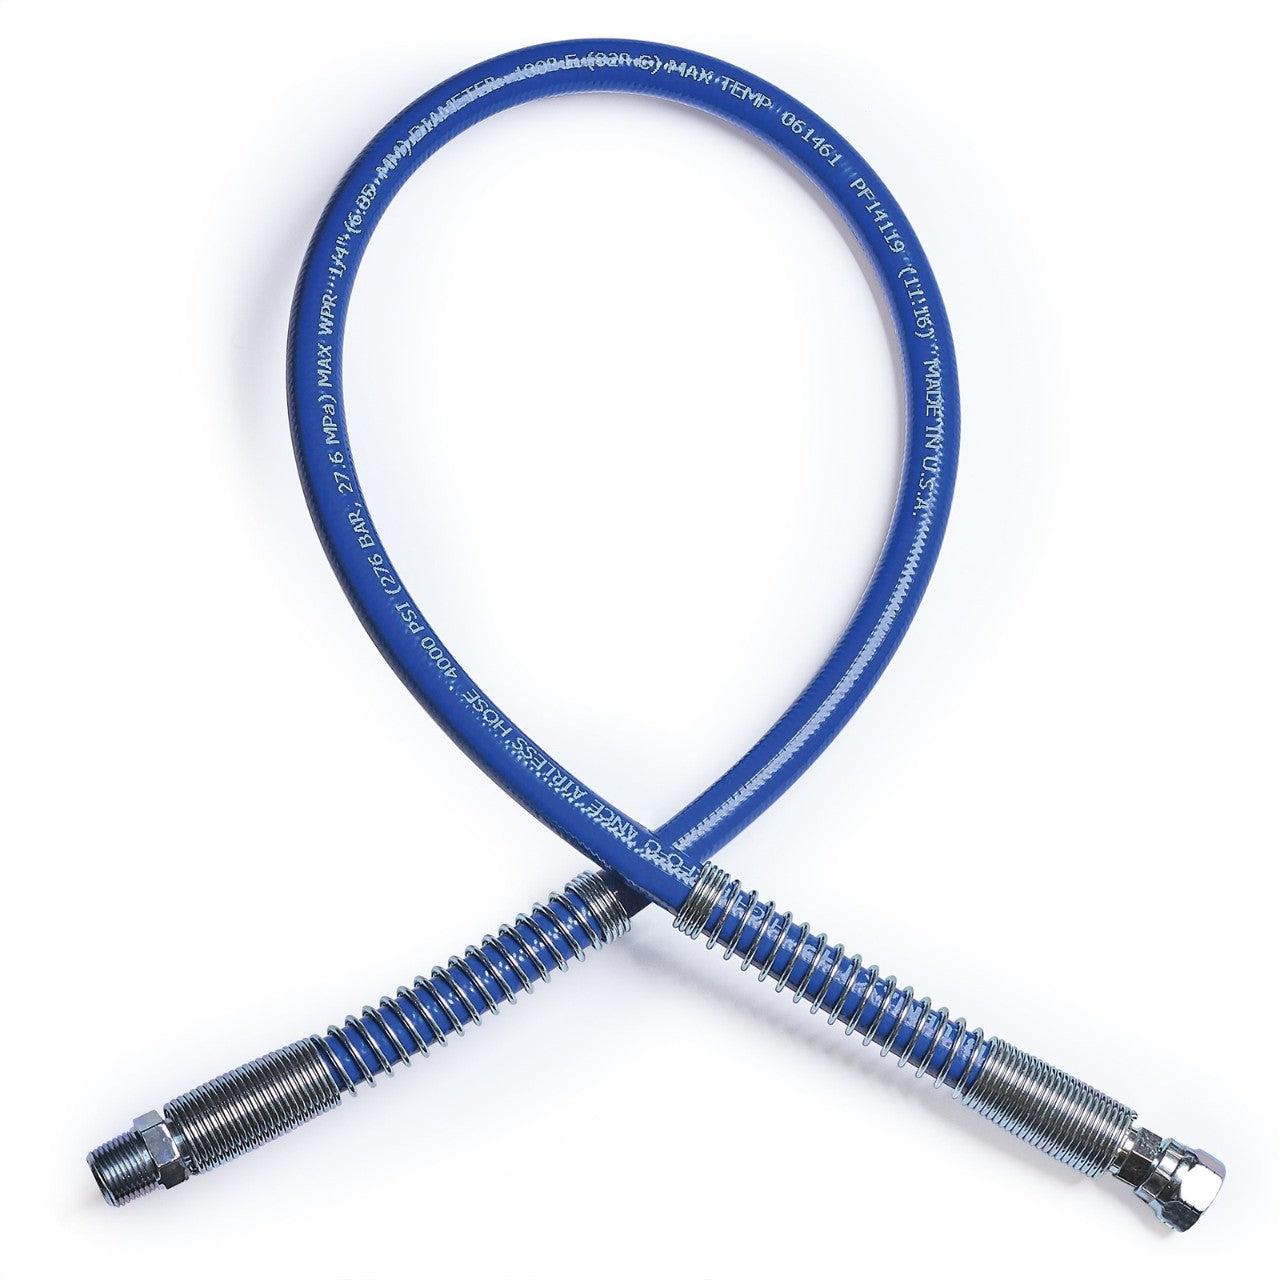 BlueMax II HP Airless Whip Hose, 1/4 in x 3 ft (0.9 m), 4000 psi